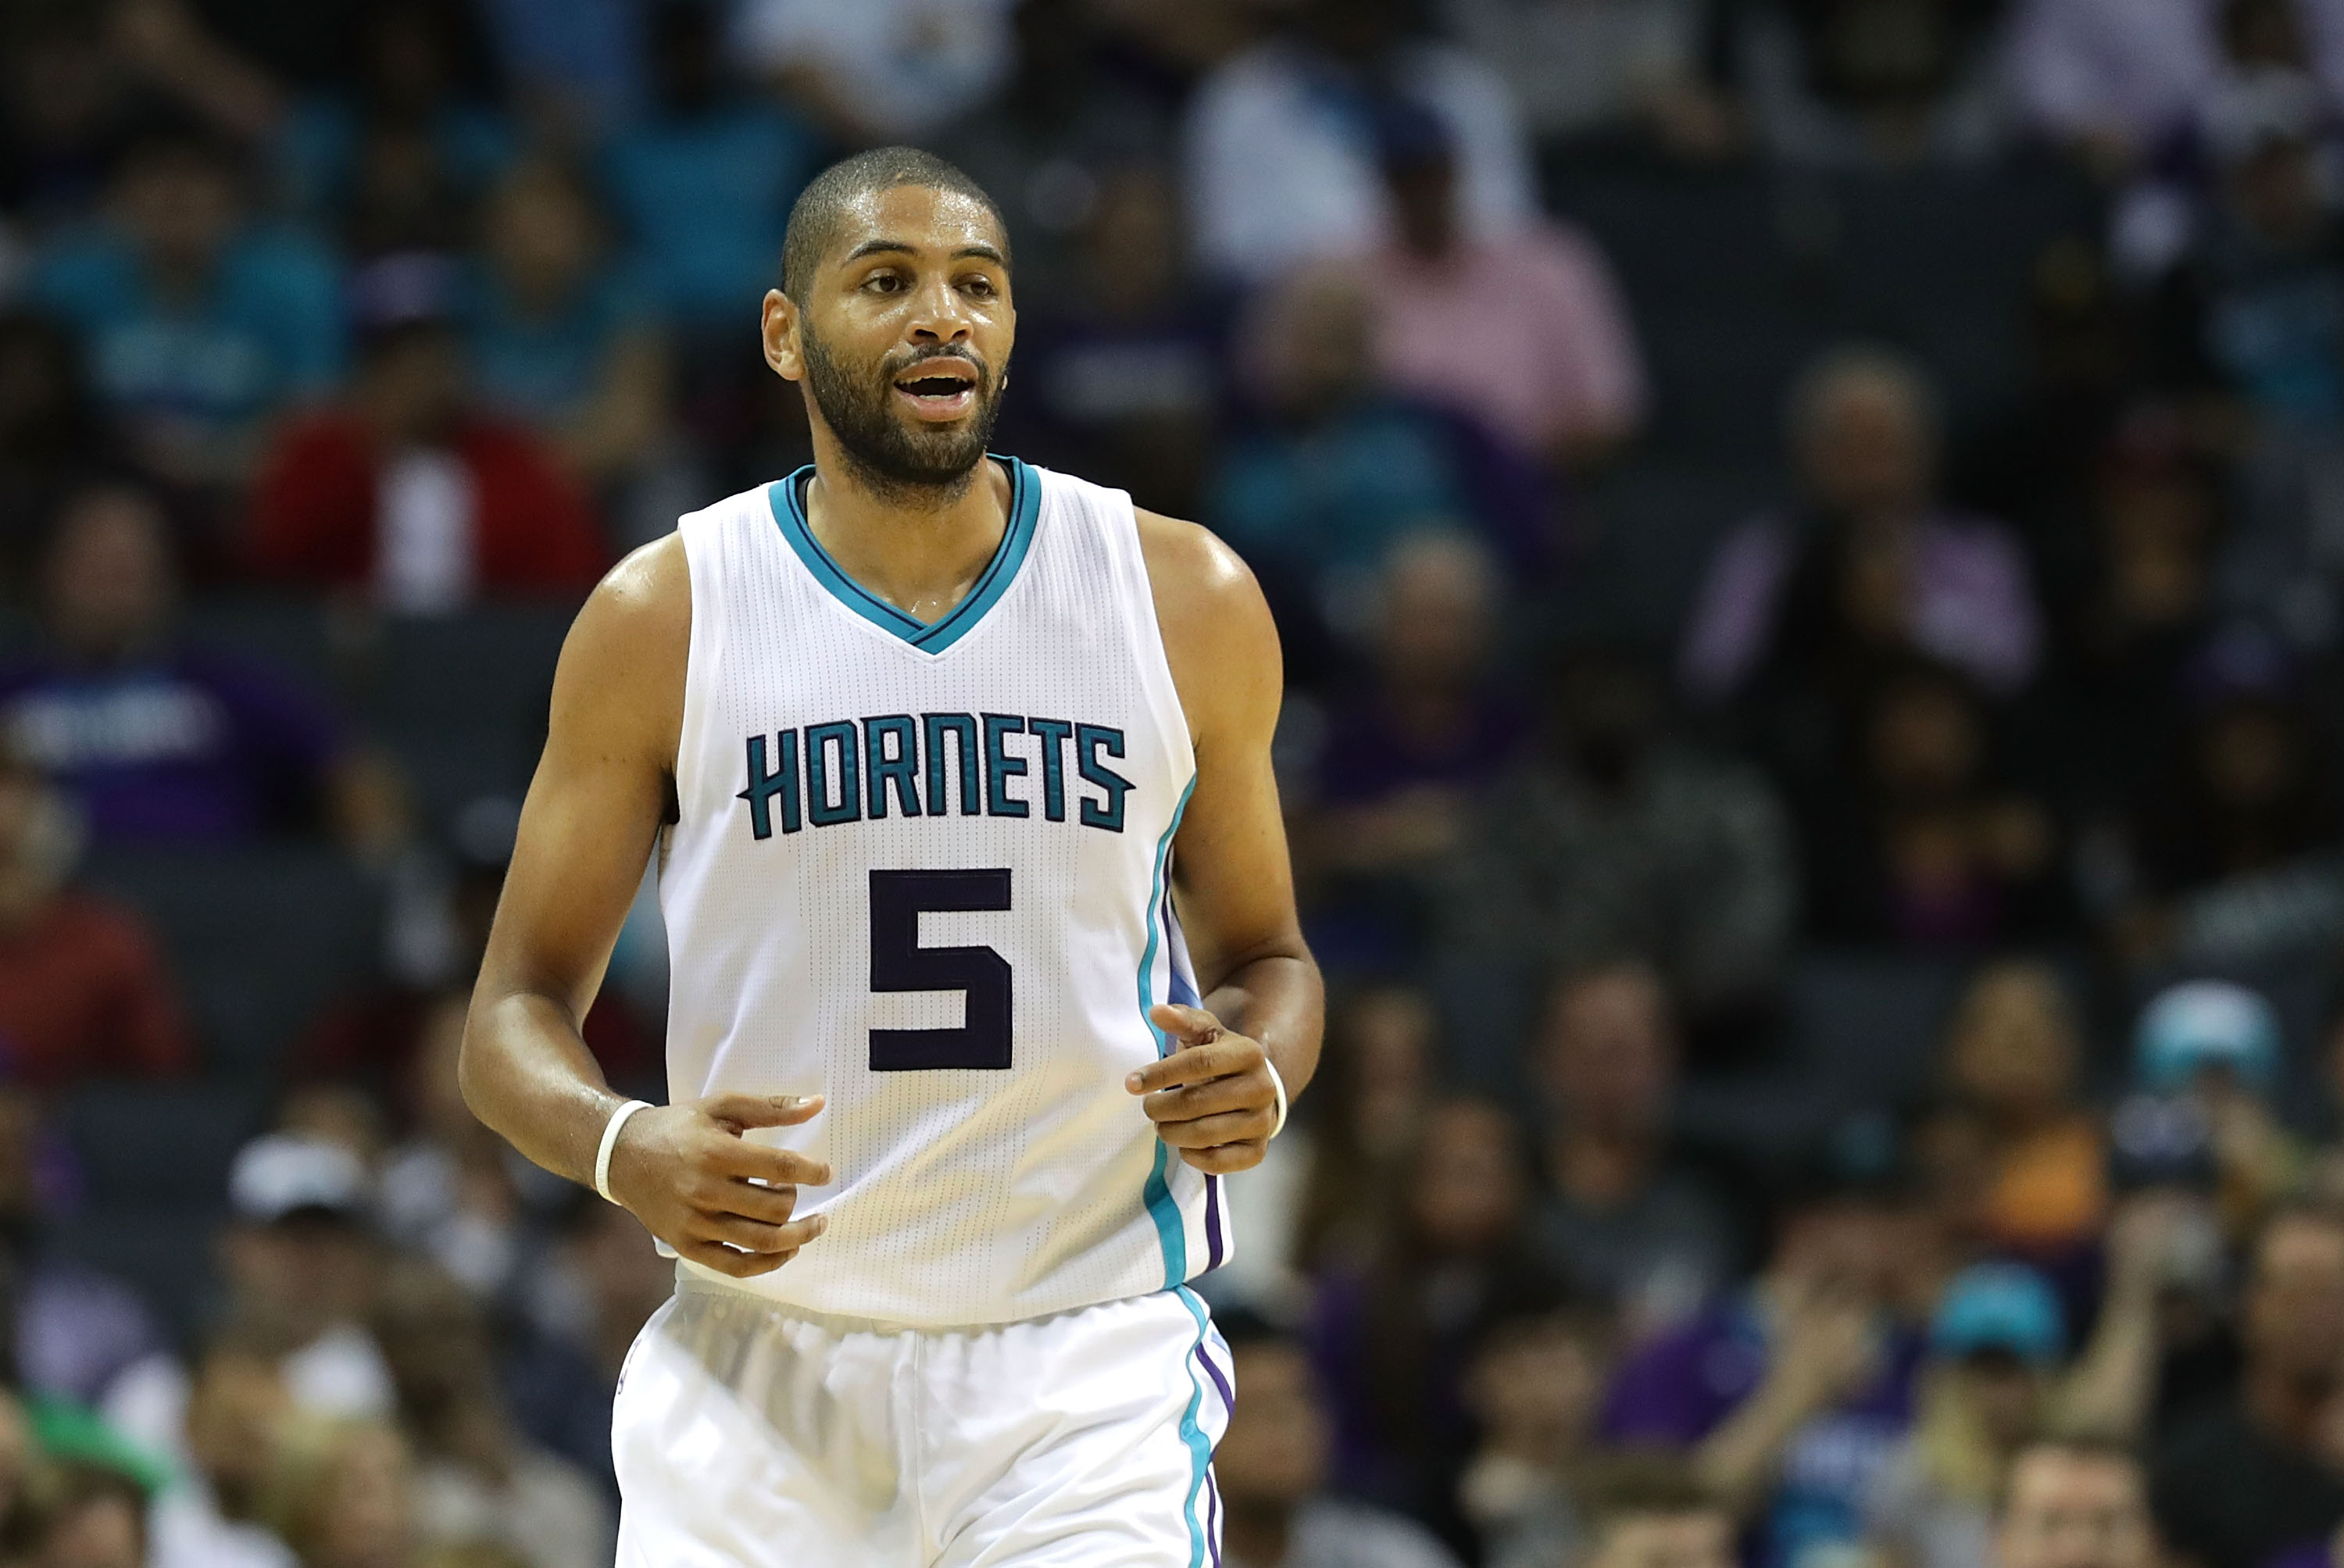 CHARLOTTE, NC - NOVEMBER 02: Nicolas Batum #5 of the Charlotte Hornets reacts after a play during their game against the Philadelphia 76ers at Spectrum Center on November 2, 2016 in Charlotte, North Carolina. NOTE TO USER: User expressly acknowledges and agrees that, by downloading and or using this photograph, User is consenting to the terms and conditions of the Getty Images License Agreement.   Streeter Lecka/Getty Images/AFP